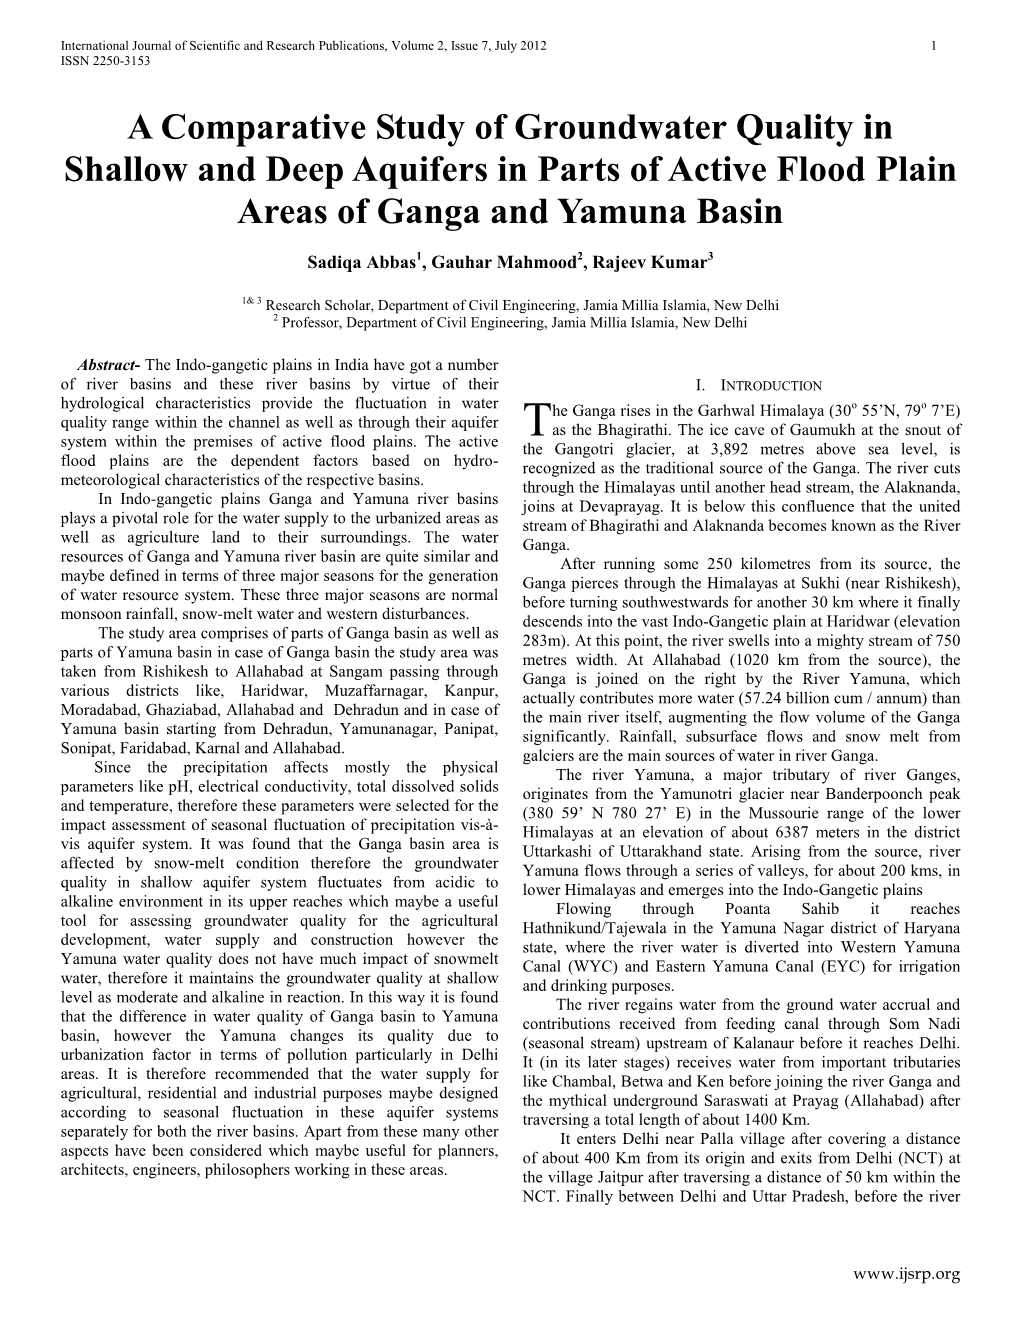 A Comparative Study of Groundwater Quality in Shallow and Deep Aquifers in Parts of Active Flood Plain Areas of Ganga and Yamuna Basin